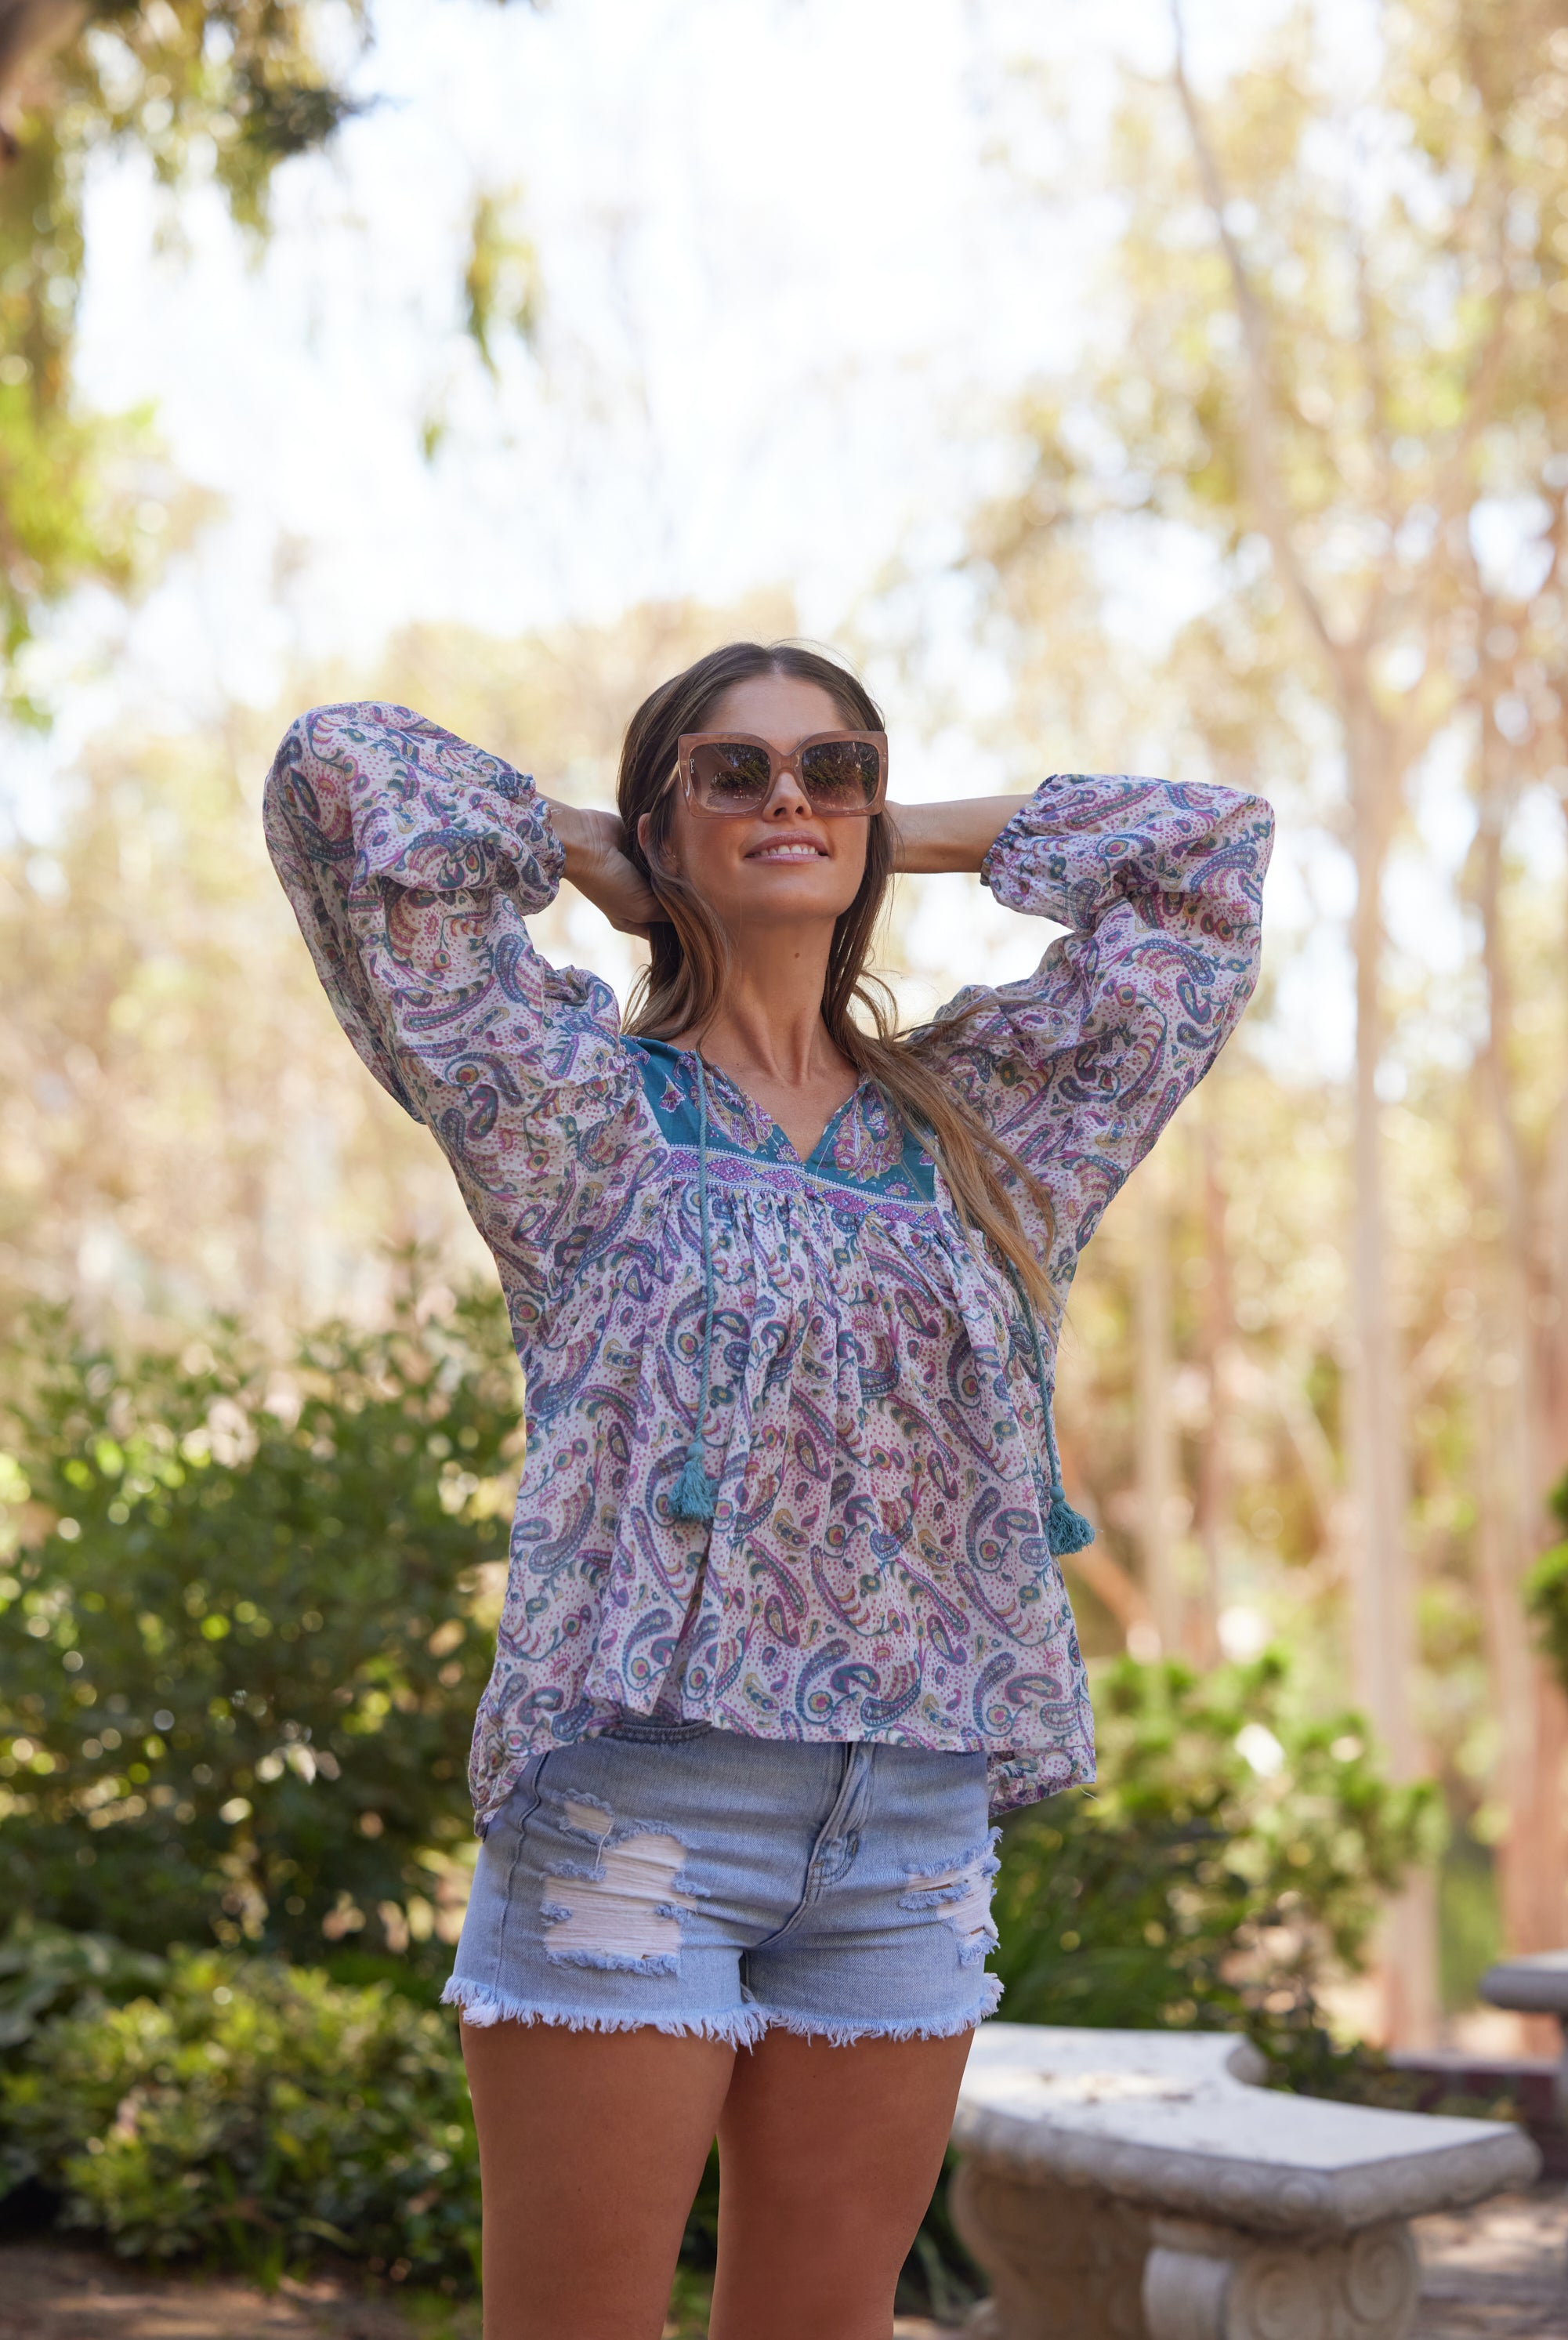 Creating the Ultimate Boho Ensemble for a Picnic Day